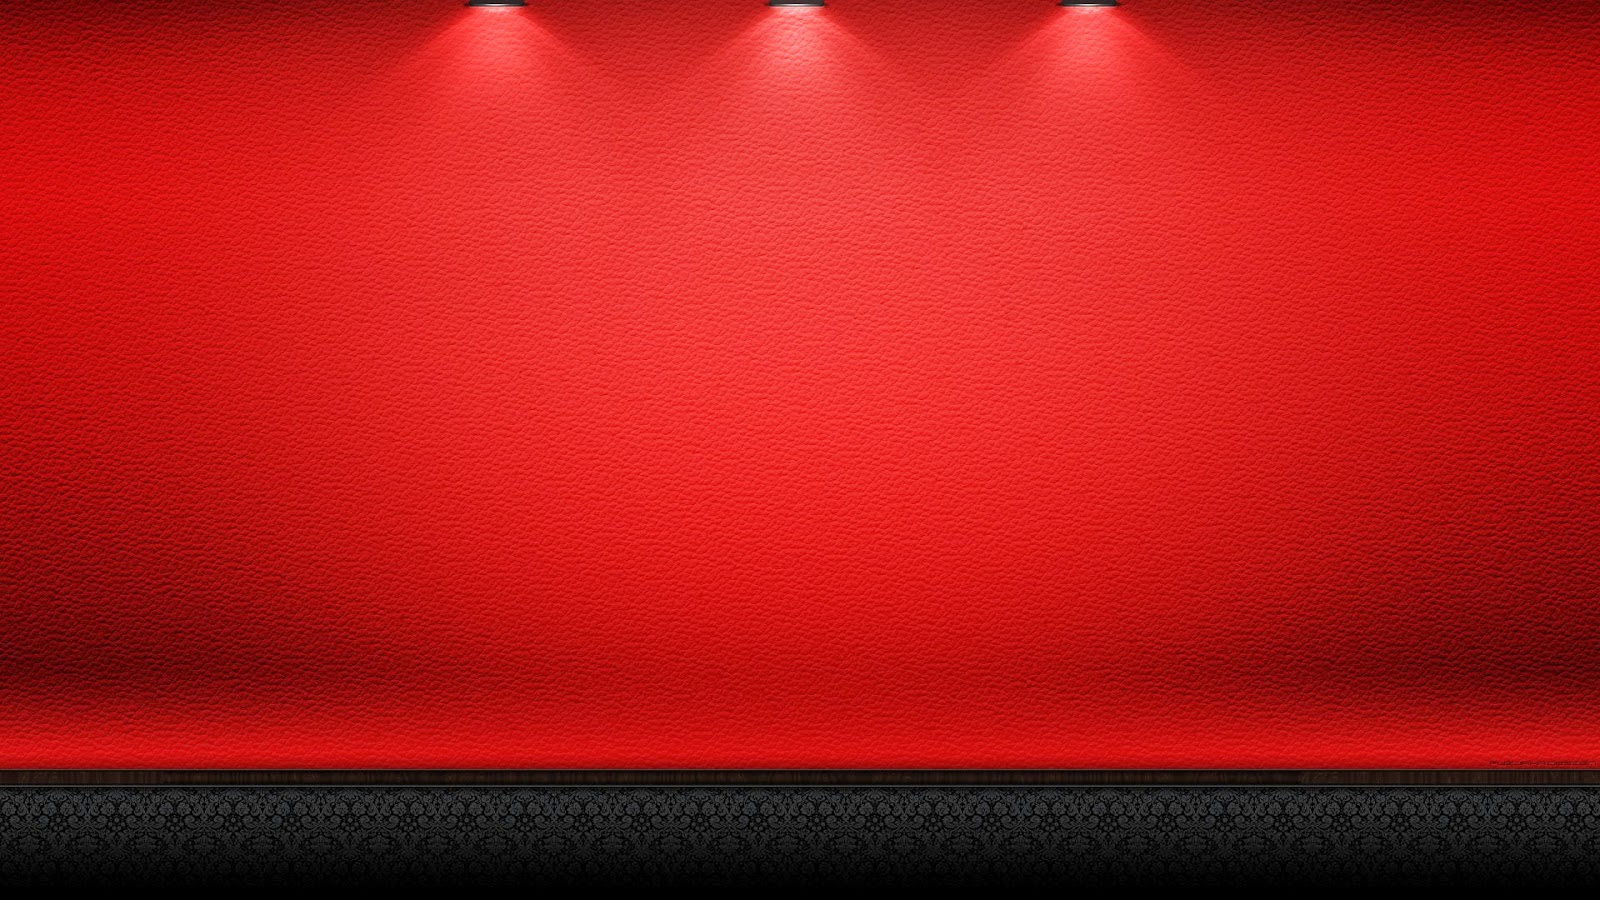 black and red wallpaper designs black and red wallpaper wallpaper